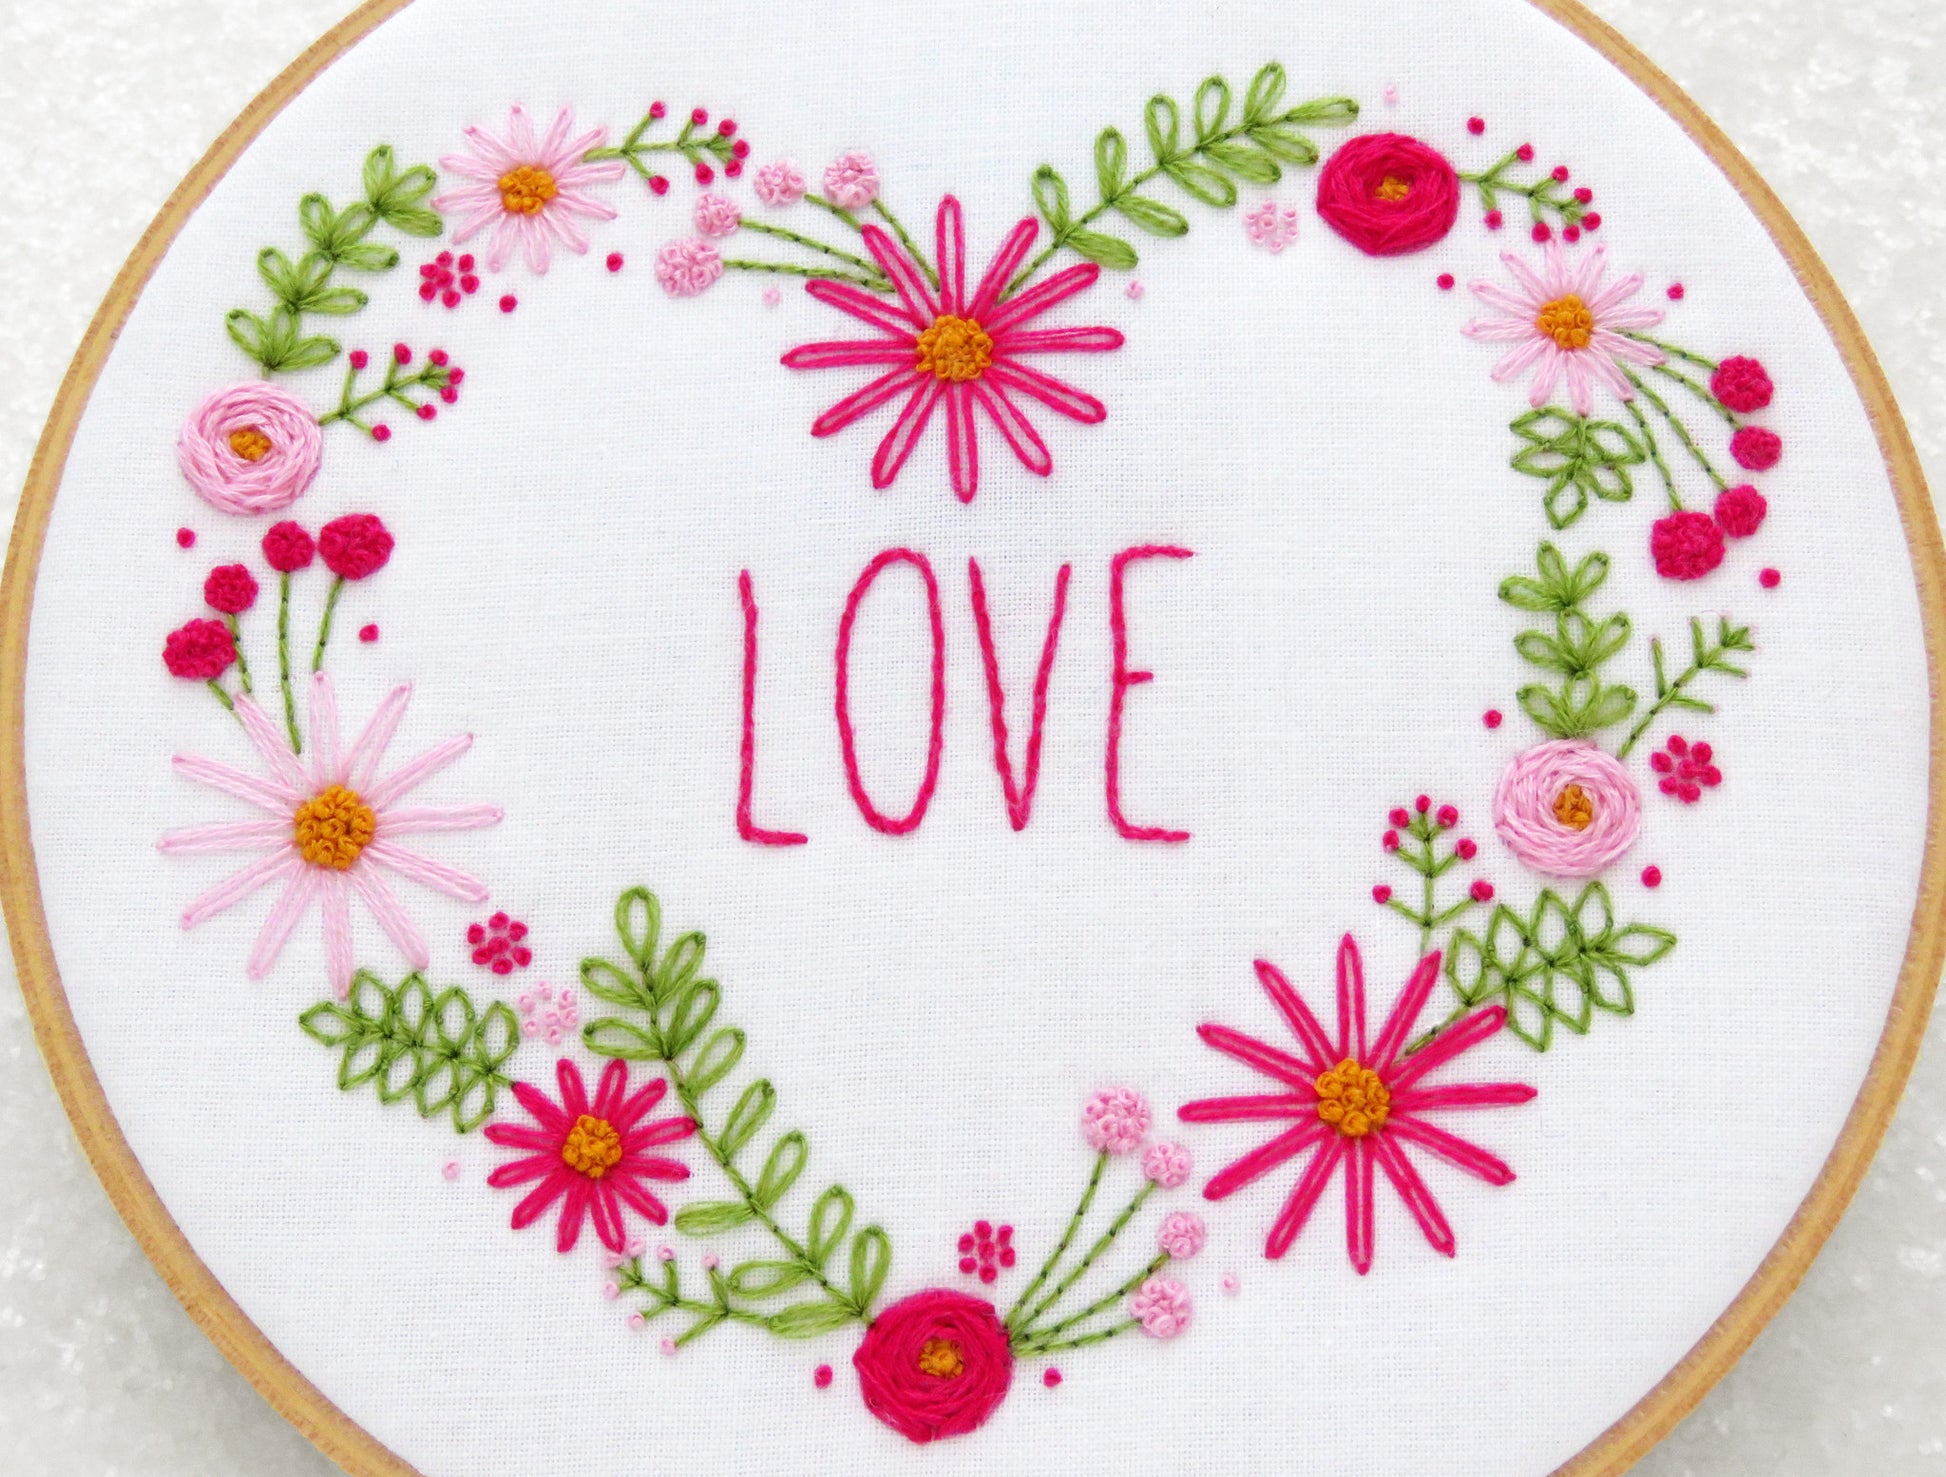 Floral Love Heart Embroidery Kit - Embroidery Kits - ohsewbootiful